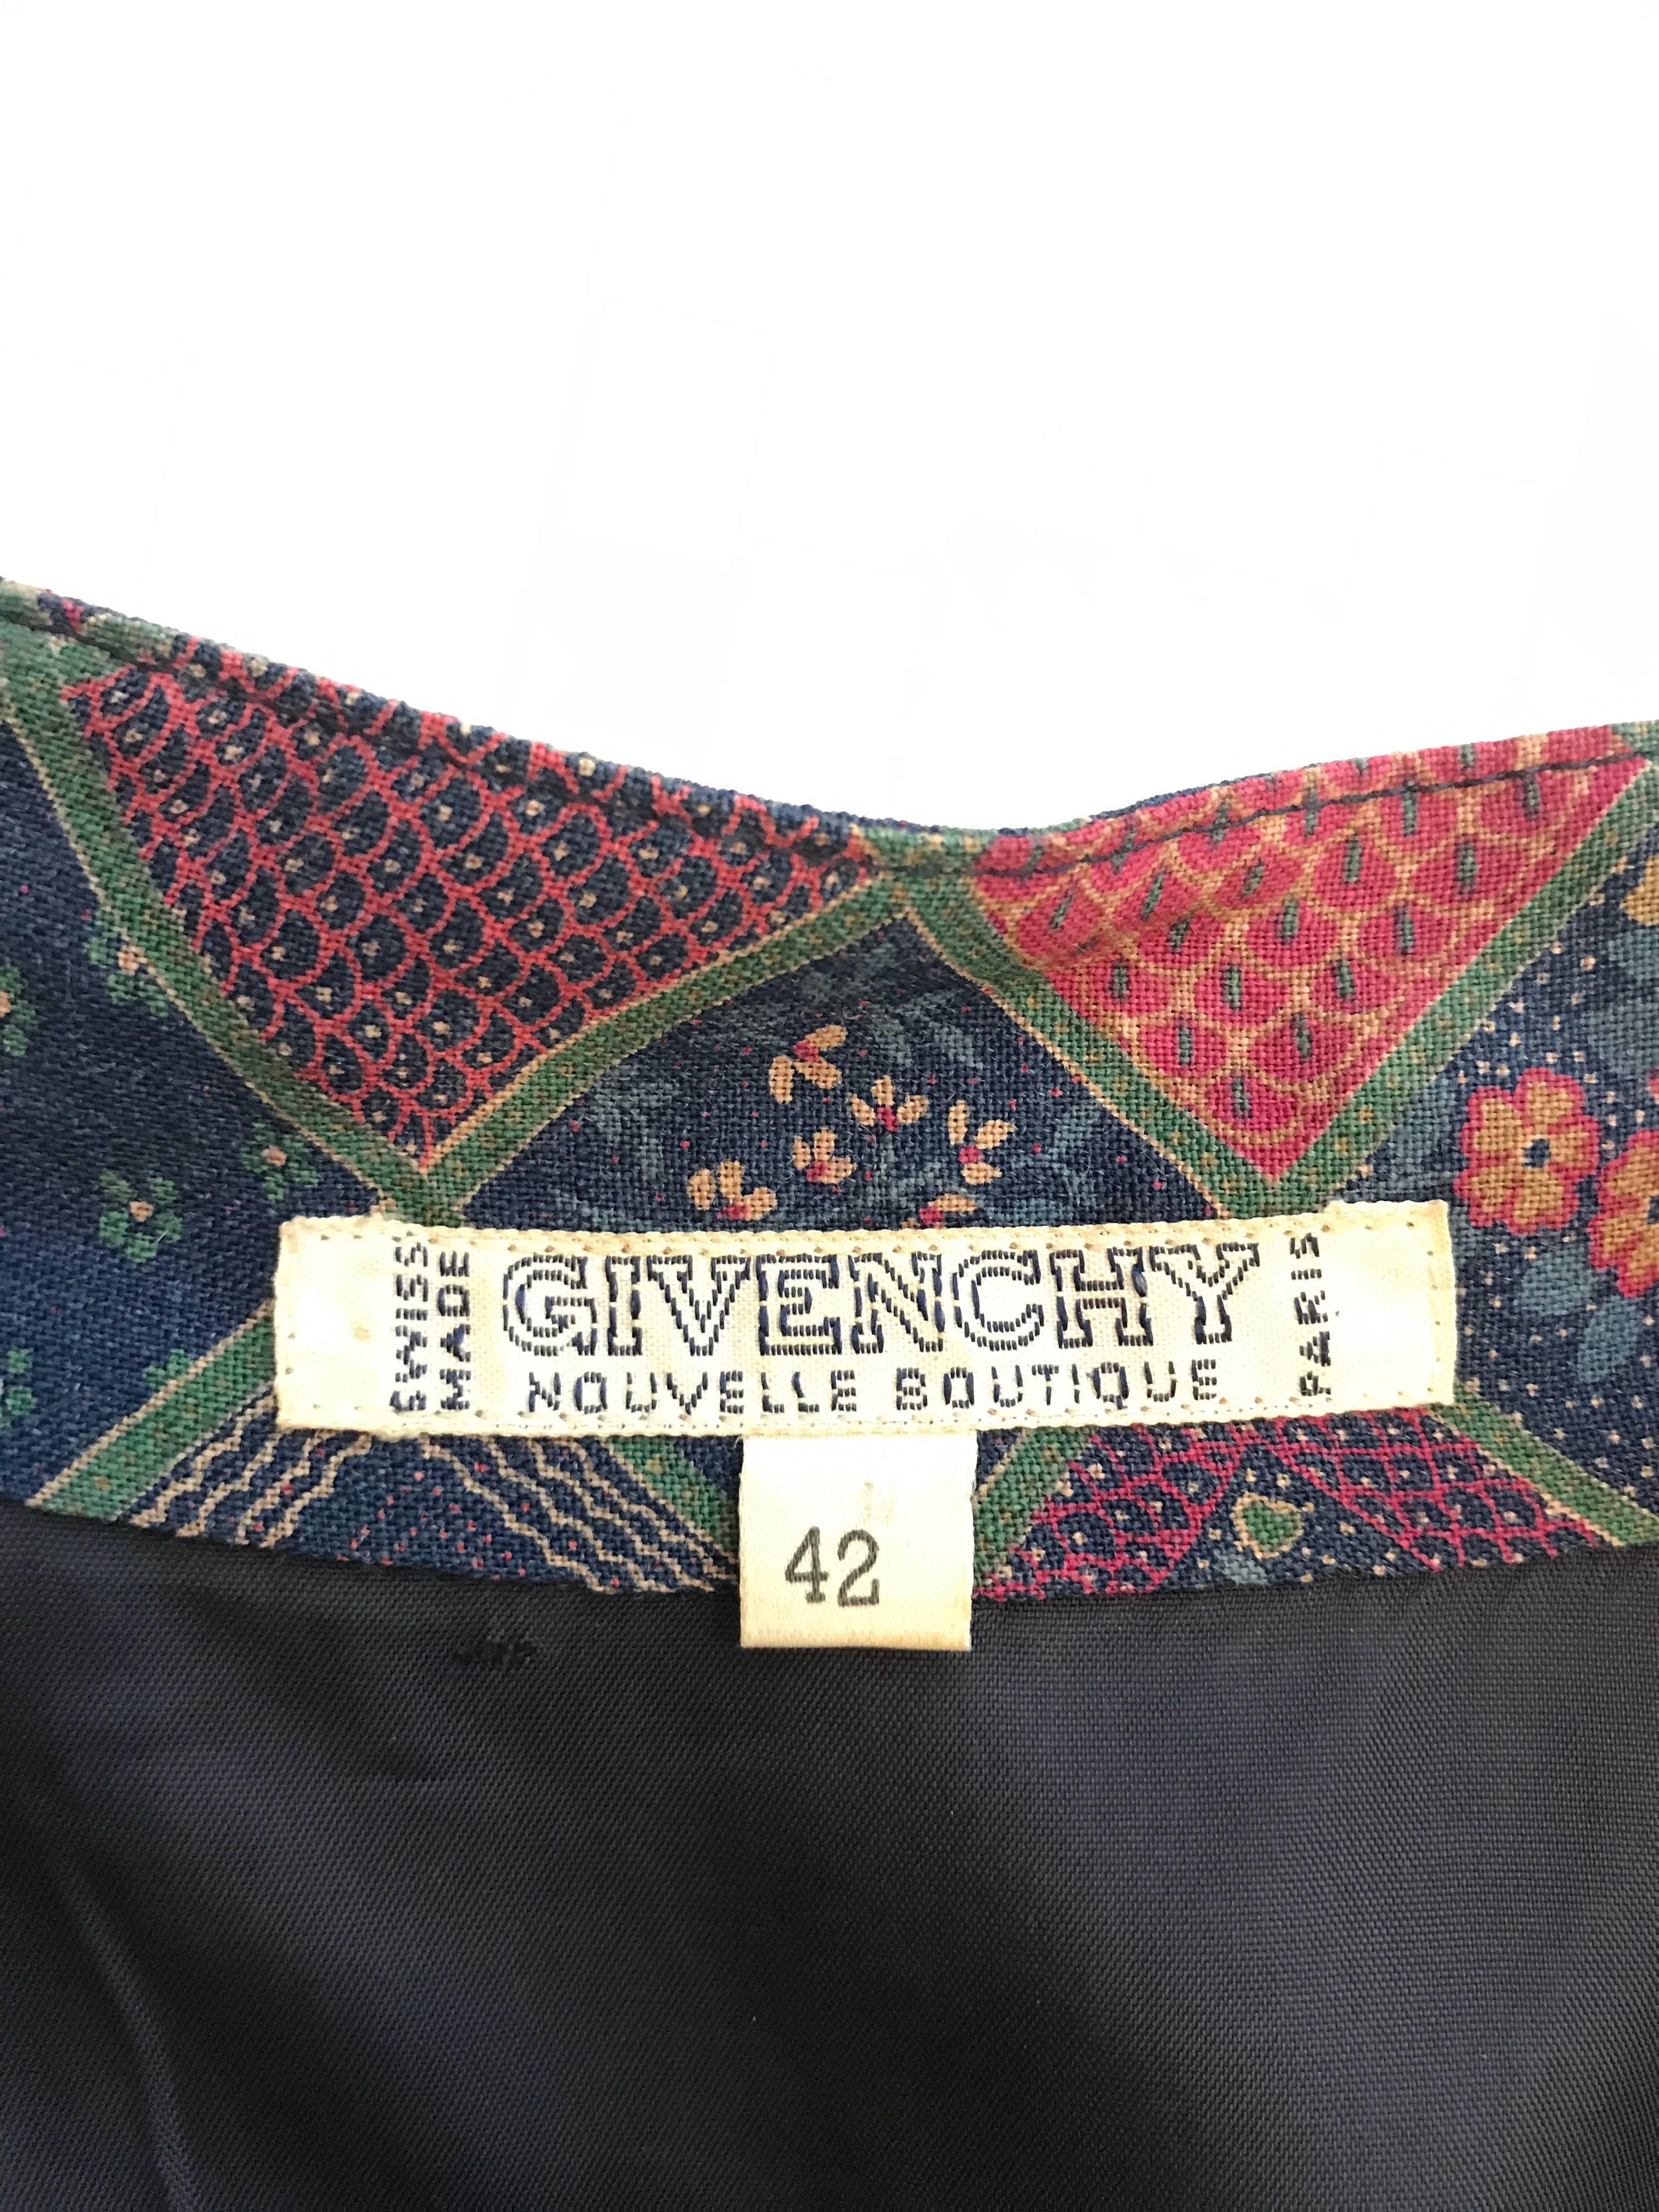 1970s Givenchy Button Front Diamond Floral Print Wool Dress with Nehru Collar In Good Condition For Sale In Los Angeles, CA